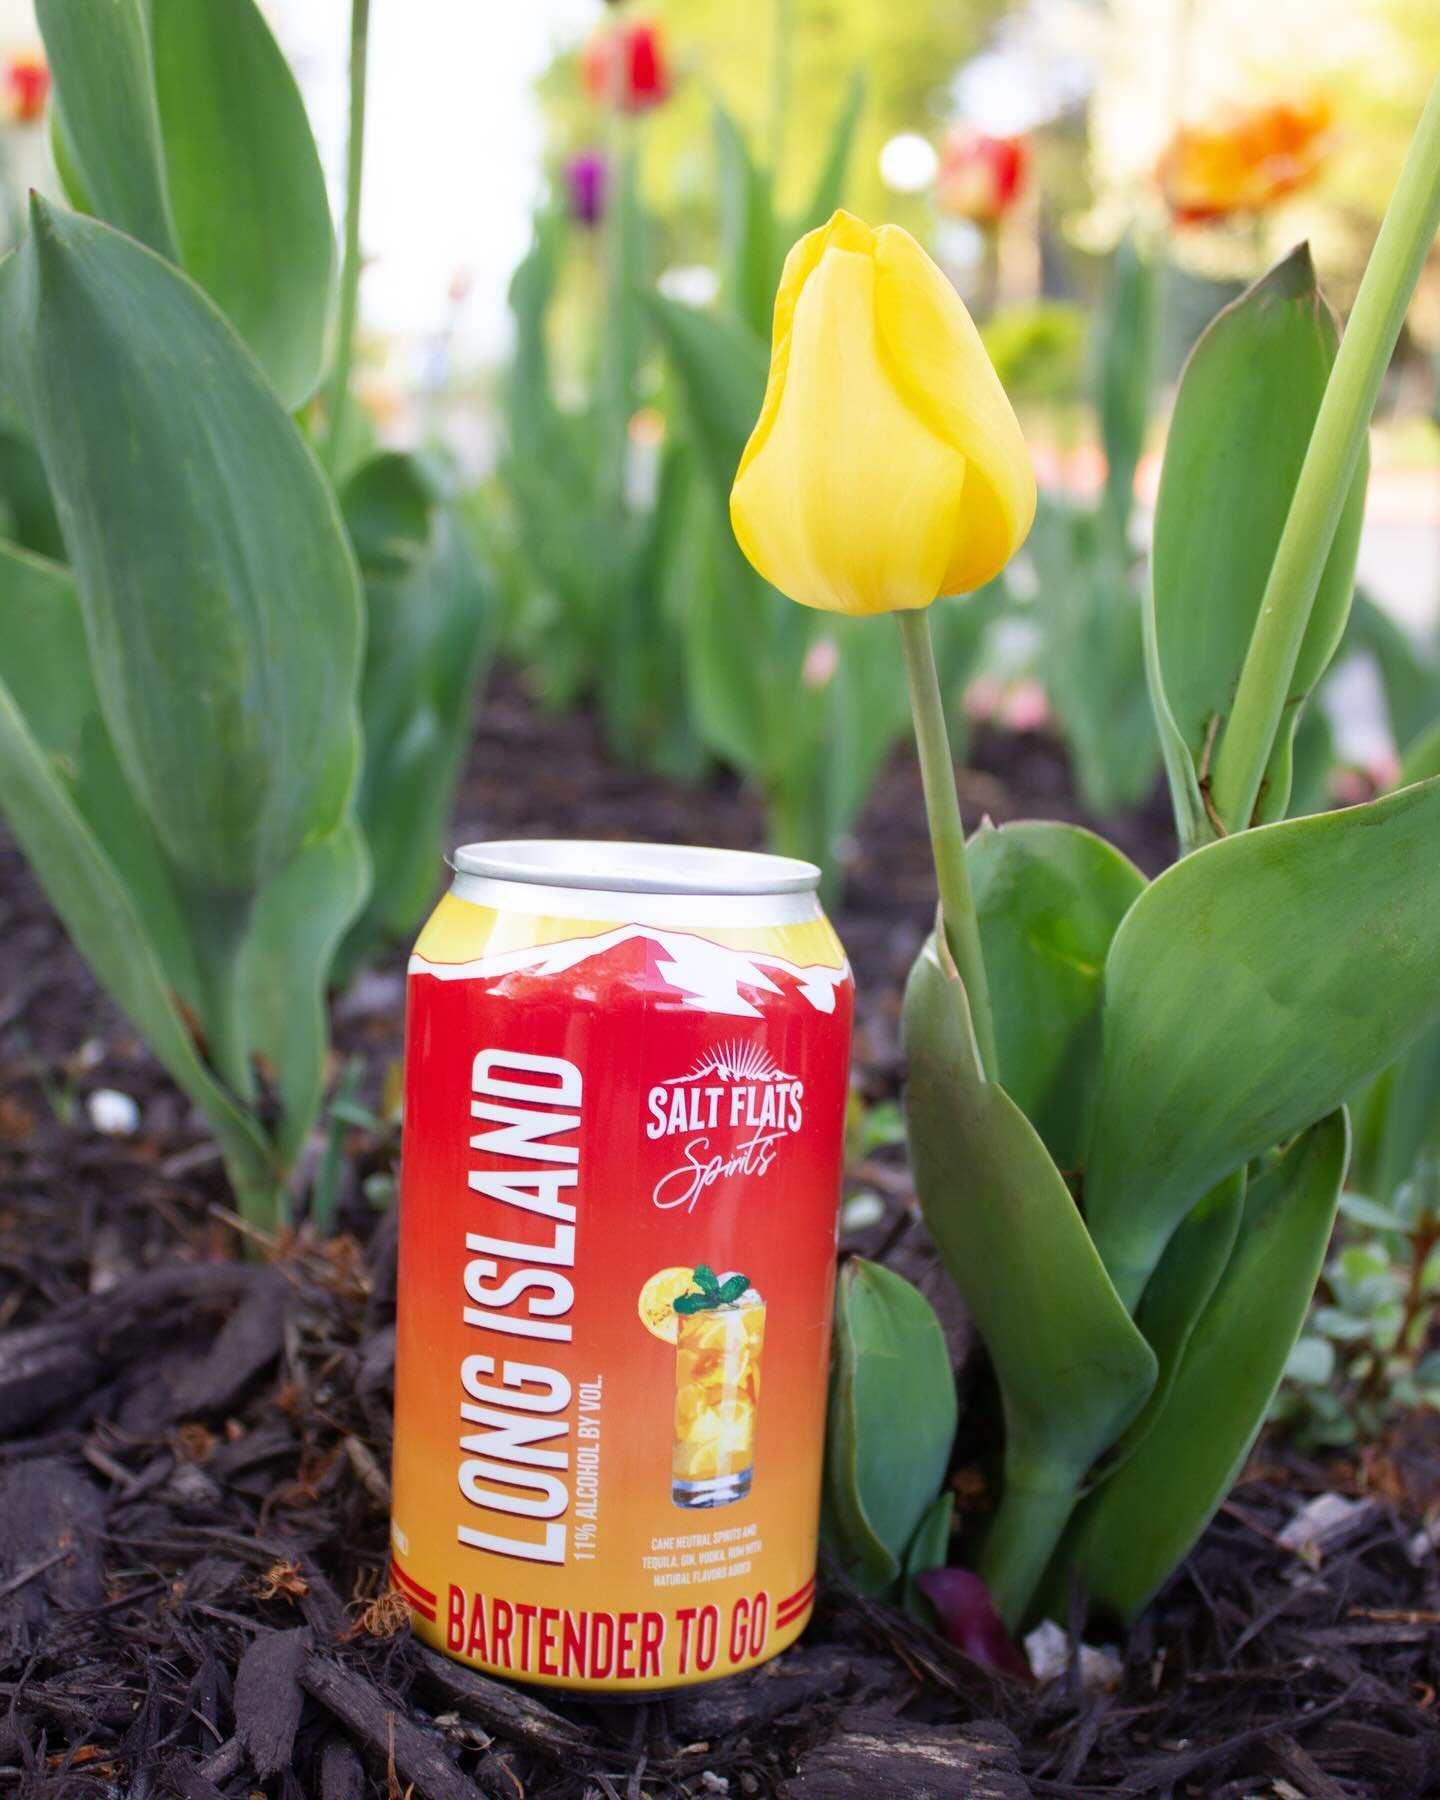 Spring has sprung🌷 And we have the perfect canned cocktail to sip on in the sun ☀️
.
.
.
.
#bartendertogo #cannedcocktail #longisland #icedtea
#cocktail #saltflatsspirits #tasty #saltflatsdistillery #yum #vodka #saltflatsdistilling #drinksaltflats #